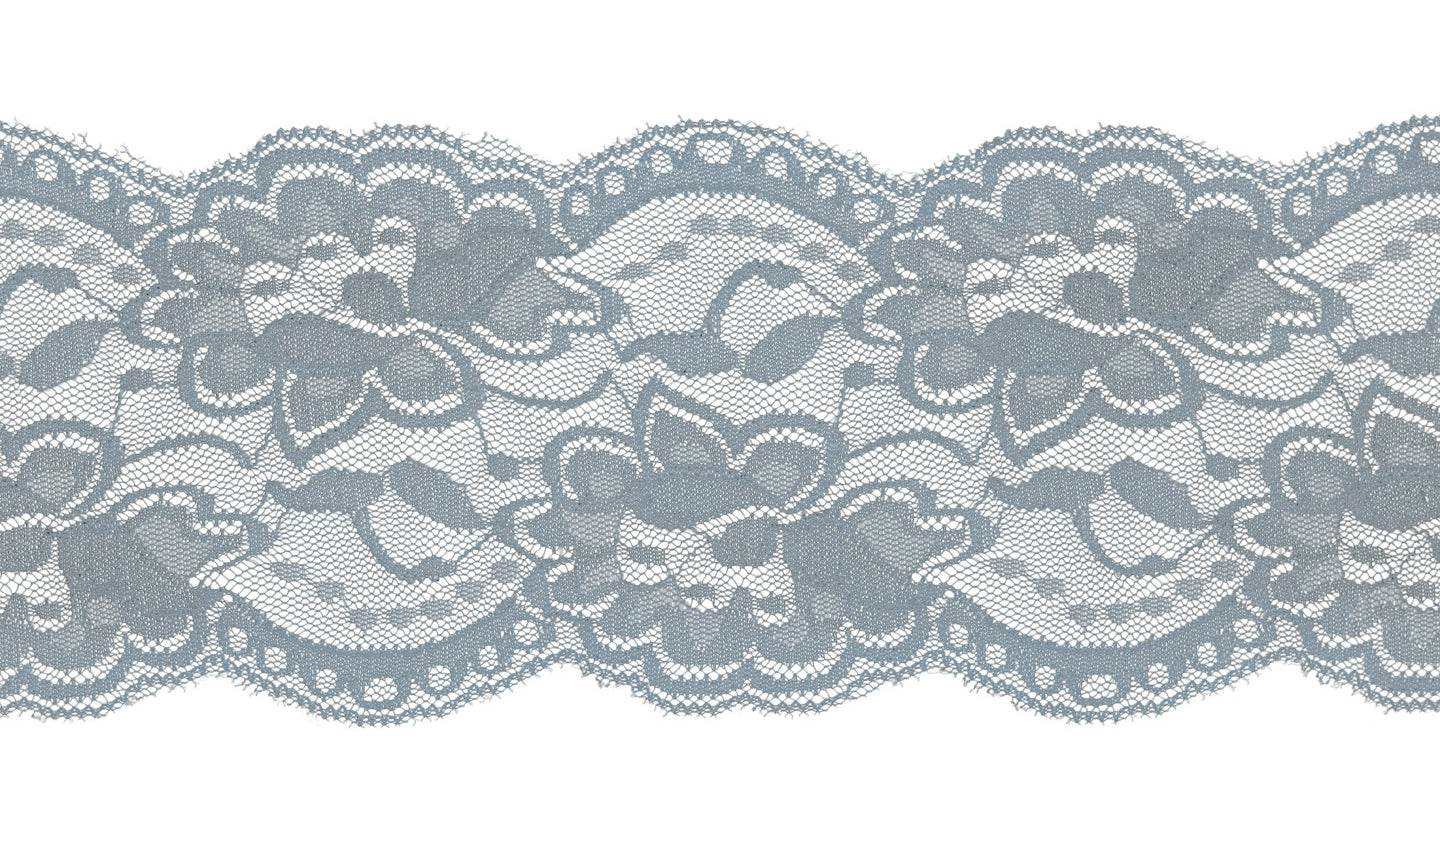 One and a Half Inch White Stretch Lace Edging- Bra-Makers Supply